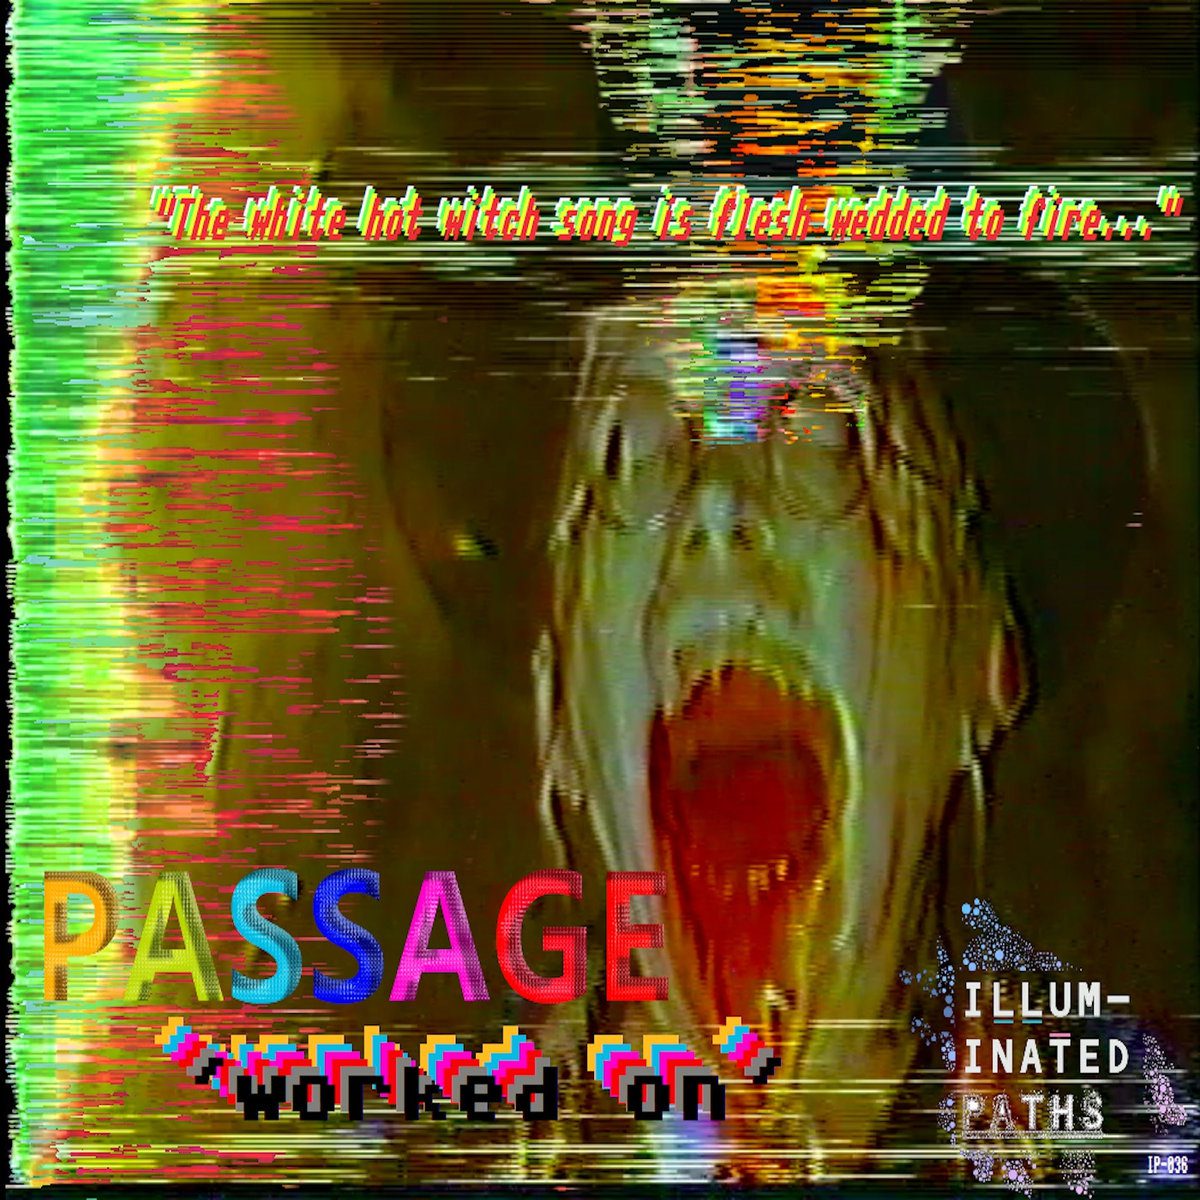 New Instrumental Mixtape By Passage - Worked On